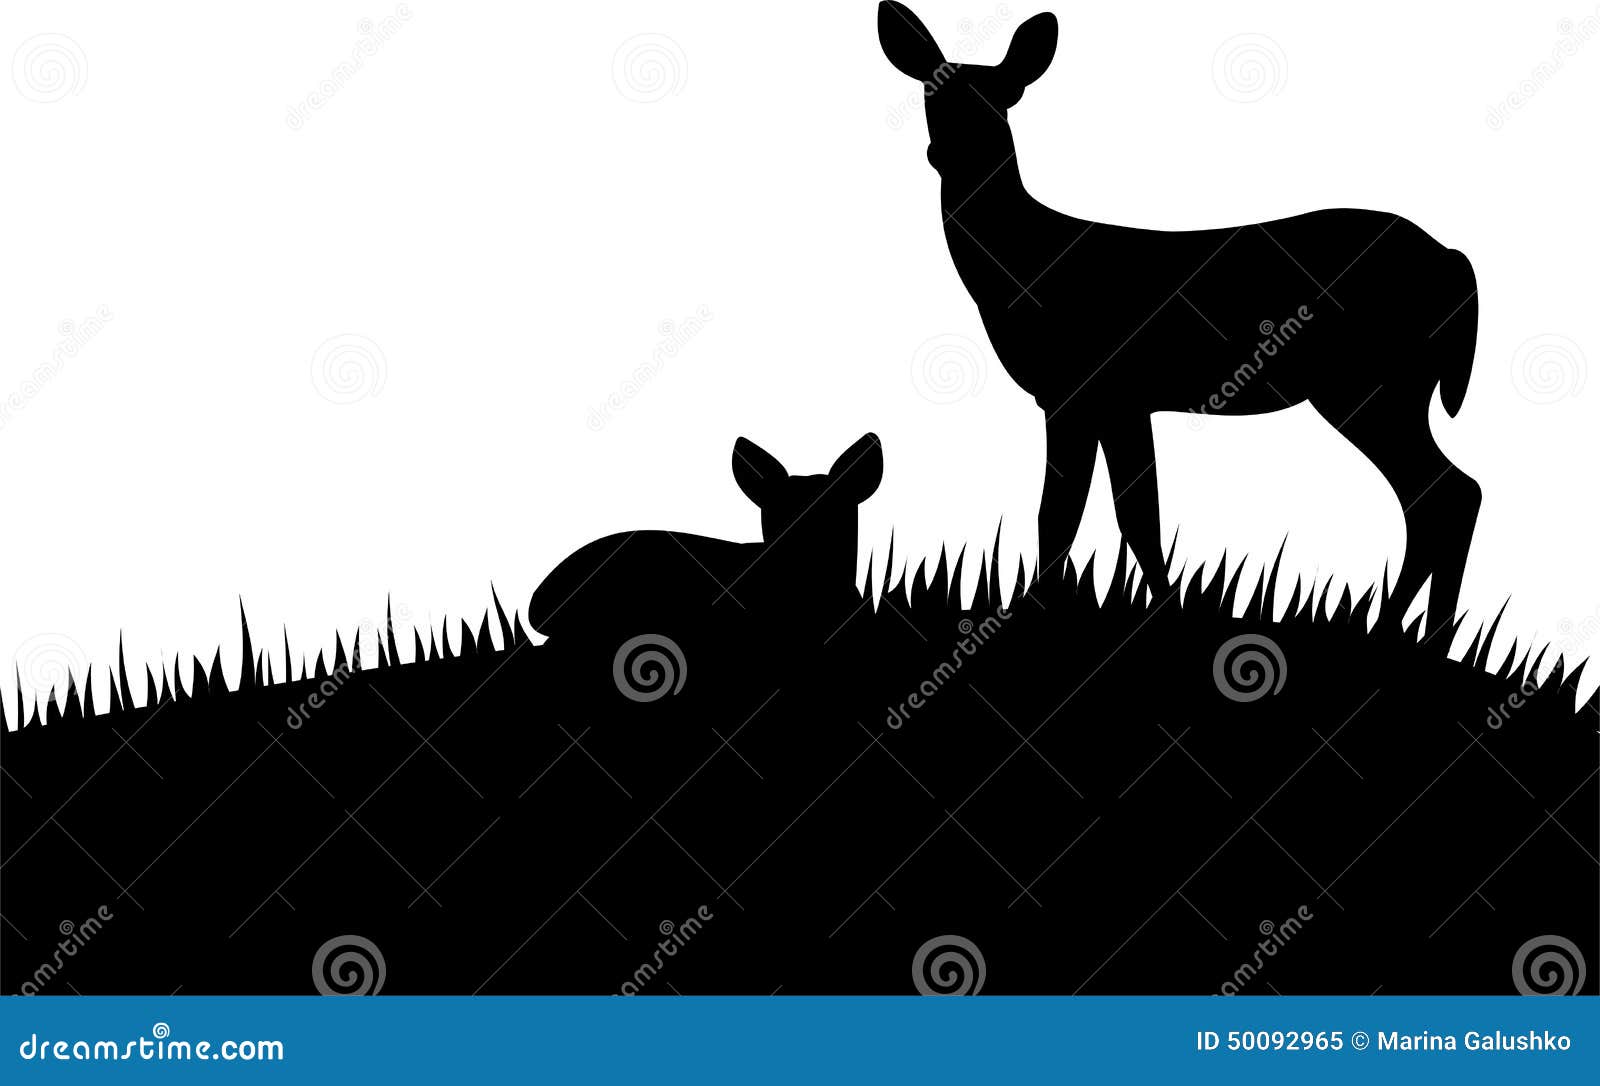 Deer Fawn Silhouette Logo Vector Object Stock Vector (Royalty